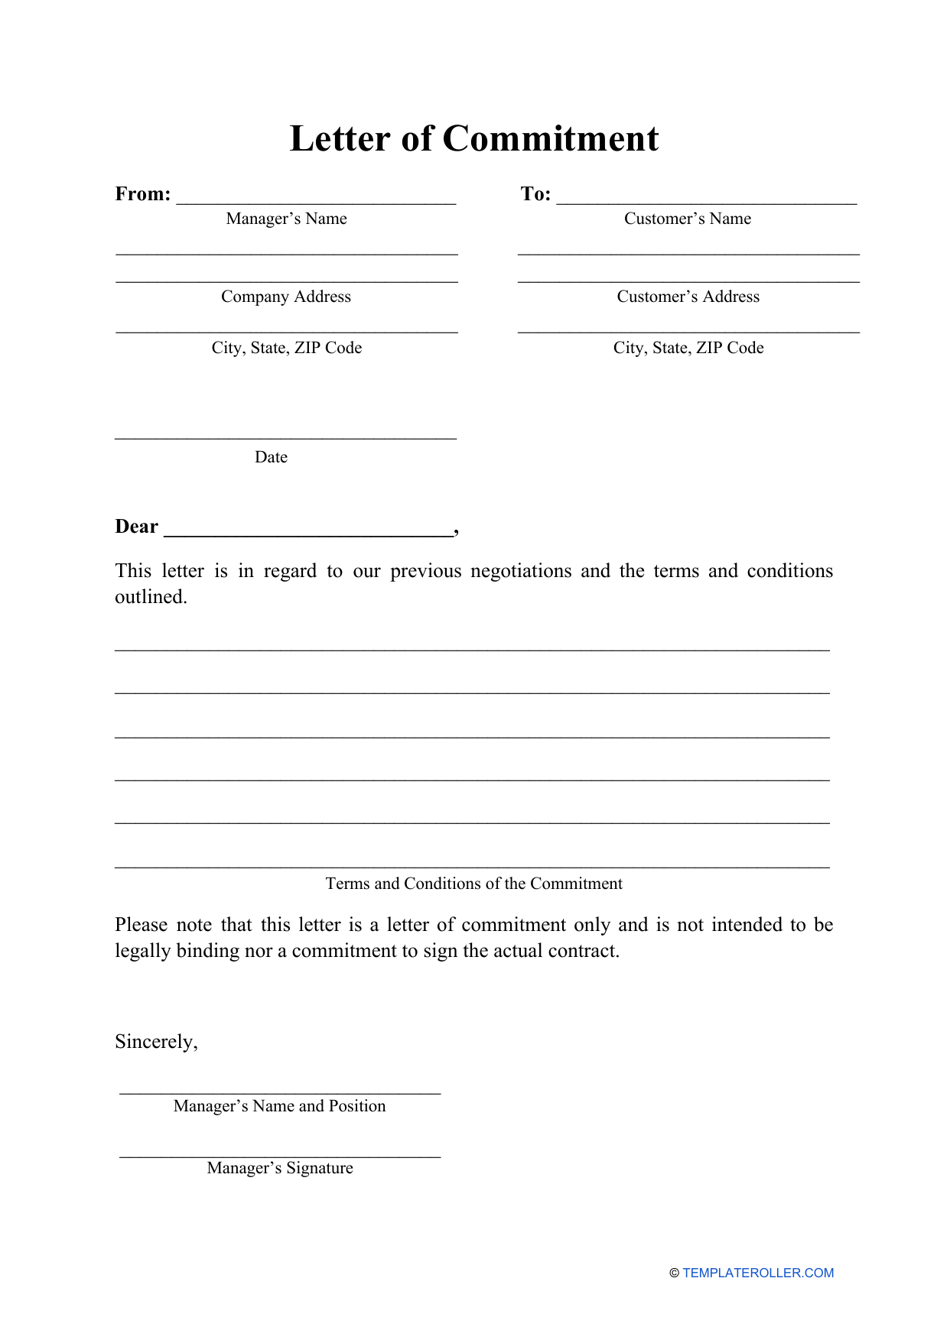 Letter of Commitment Template Download Printable PDF  Templateroller With Letter Of Commitment Template